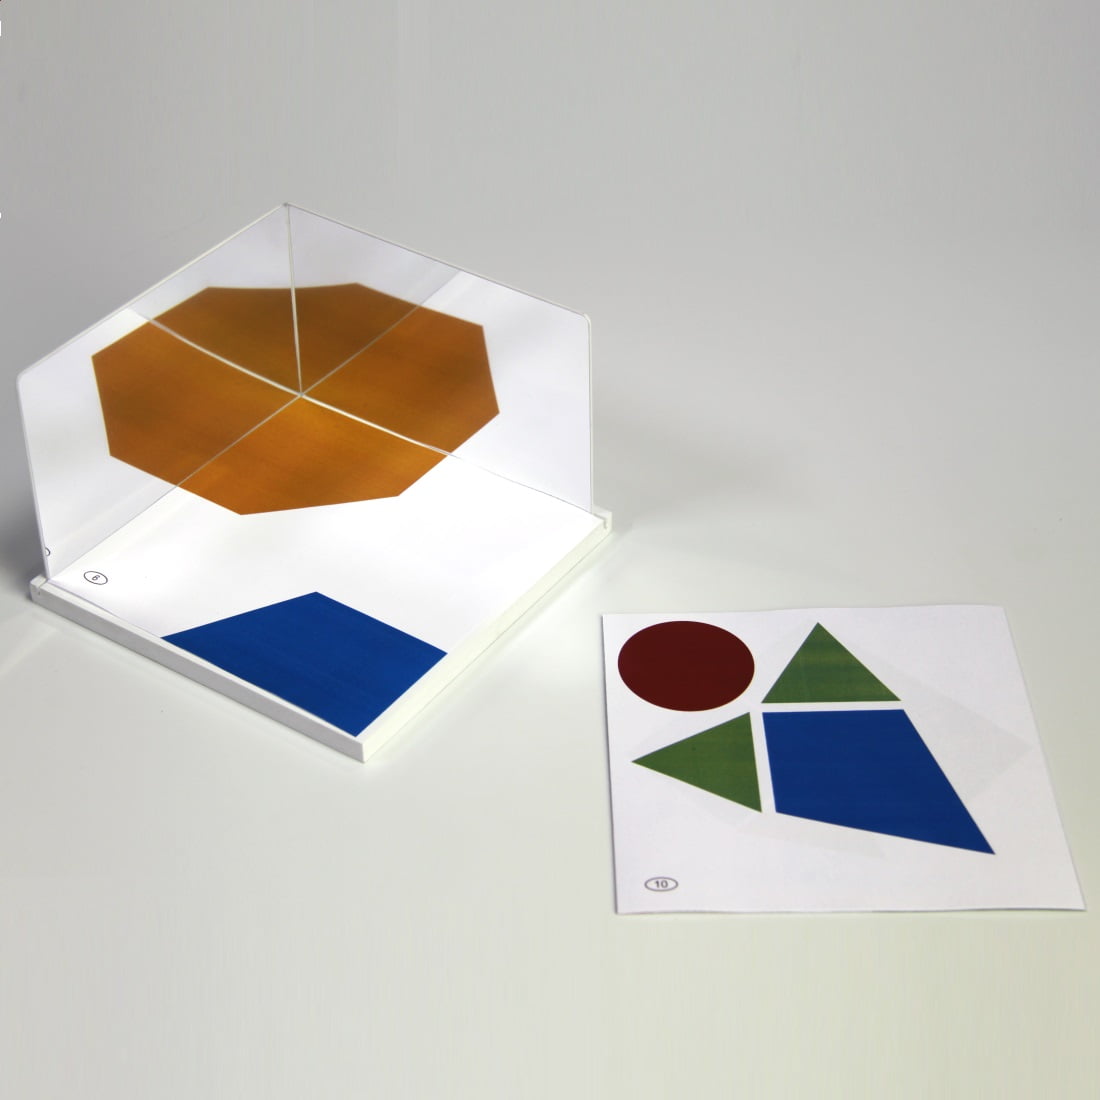 Set of 2 Mirrors from the Knowledge Research | why.gr